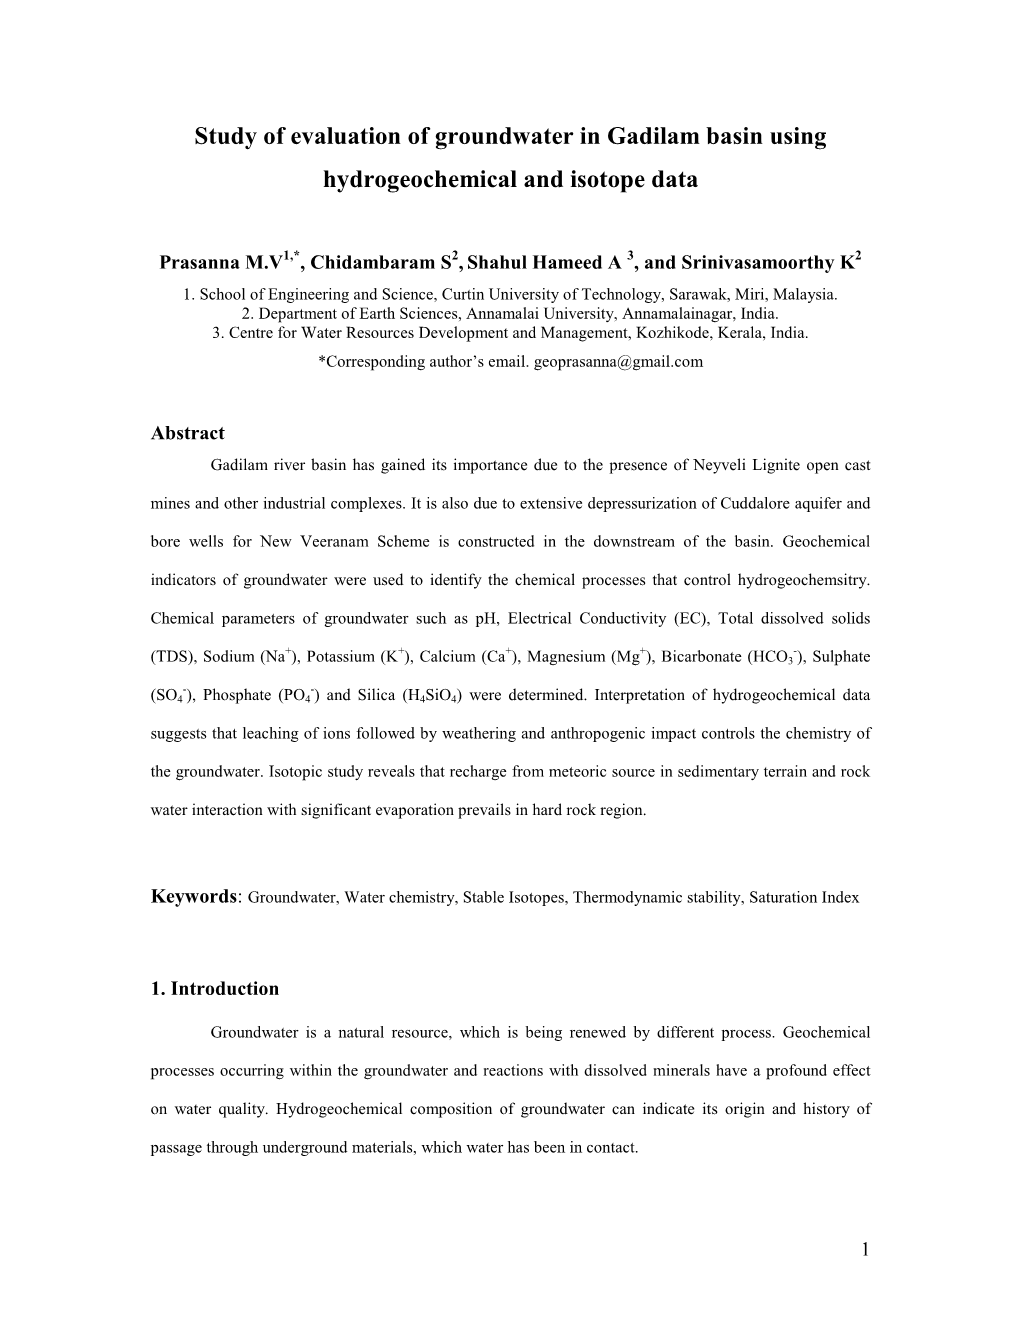 Study of Evaluation of Groundwater in Gadilam Basin Using Hydrogeochemical and Isotope Data